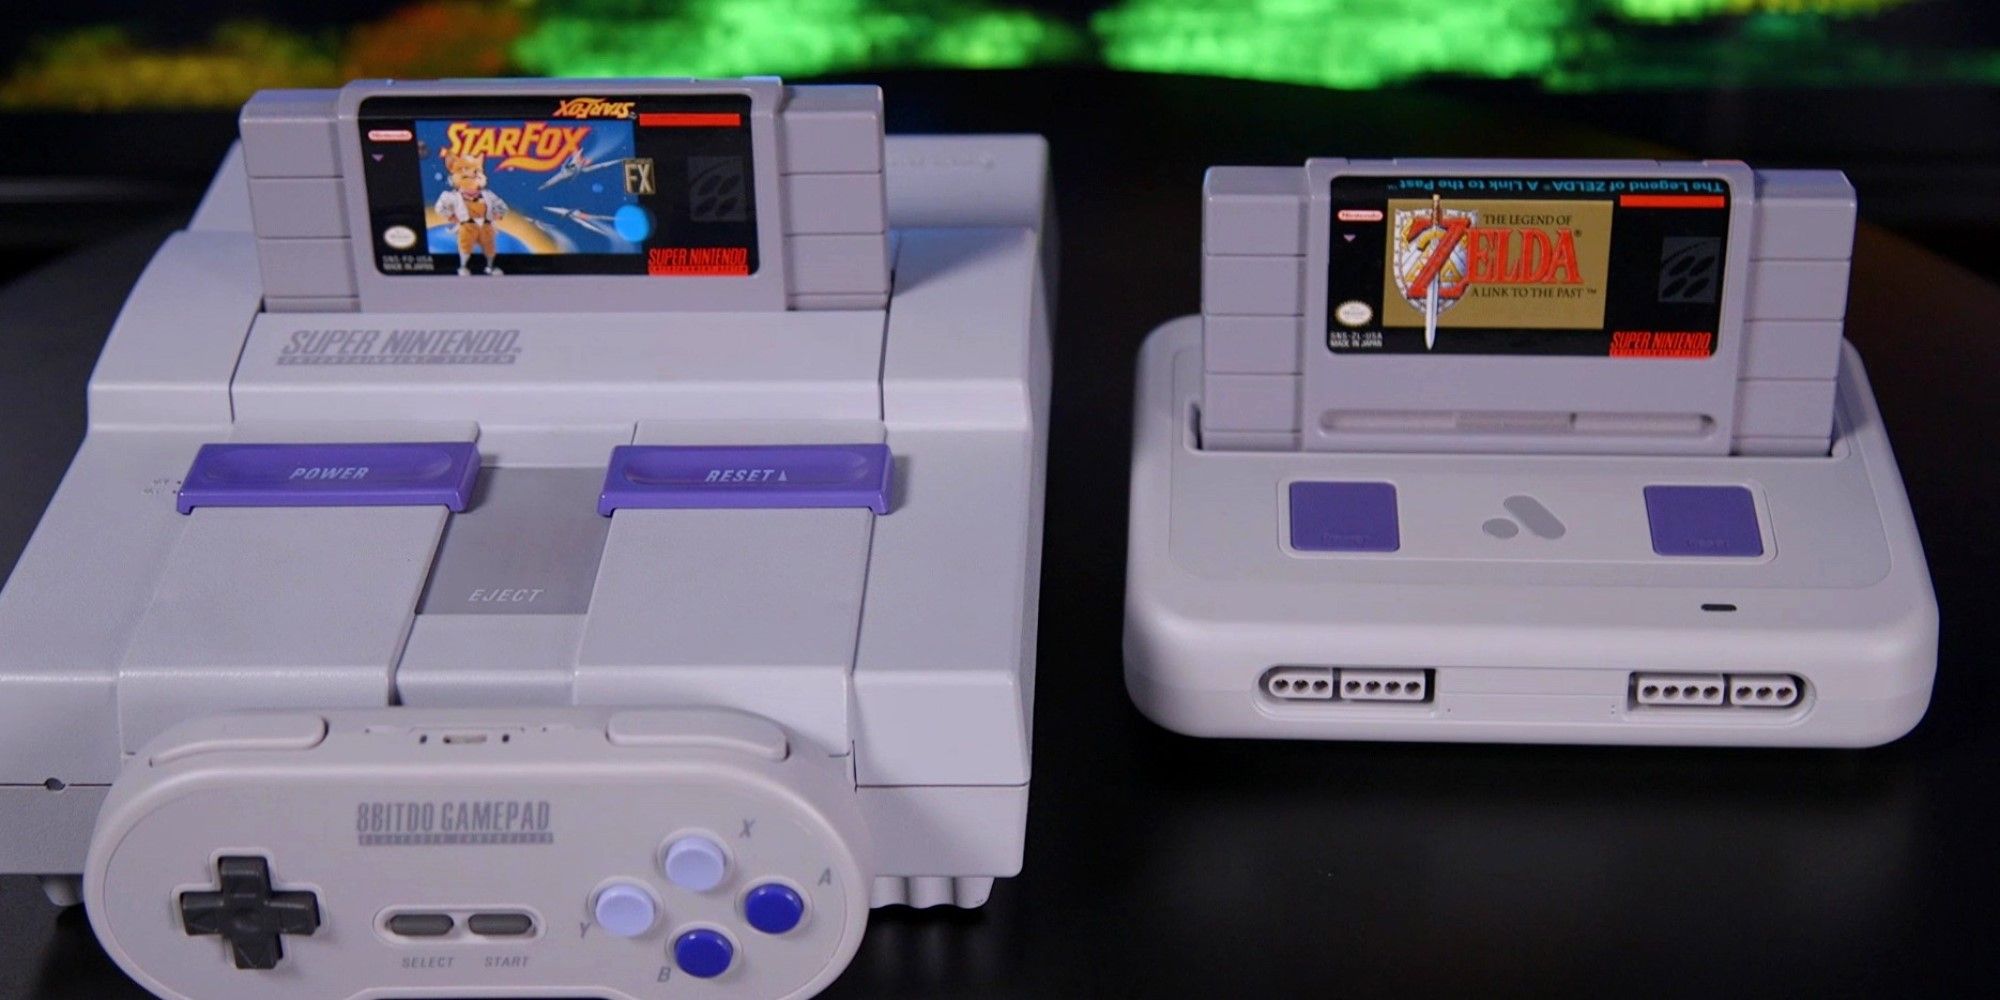 An original Super Nintendo Entertainment System (left) with the Analogue Super Nt (right)